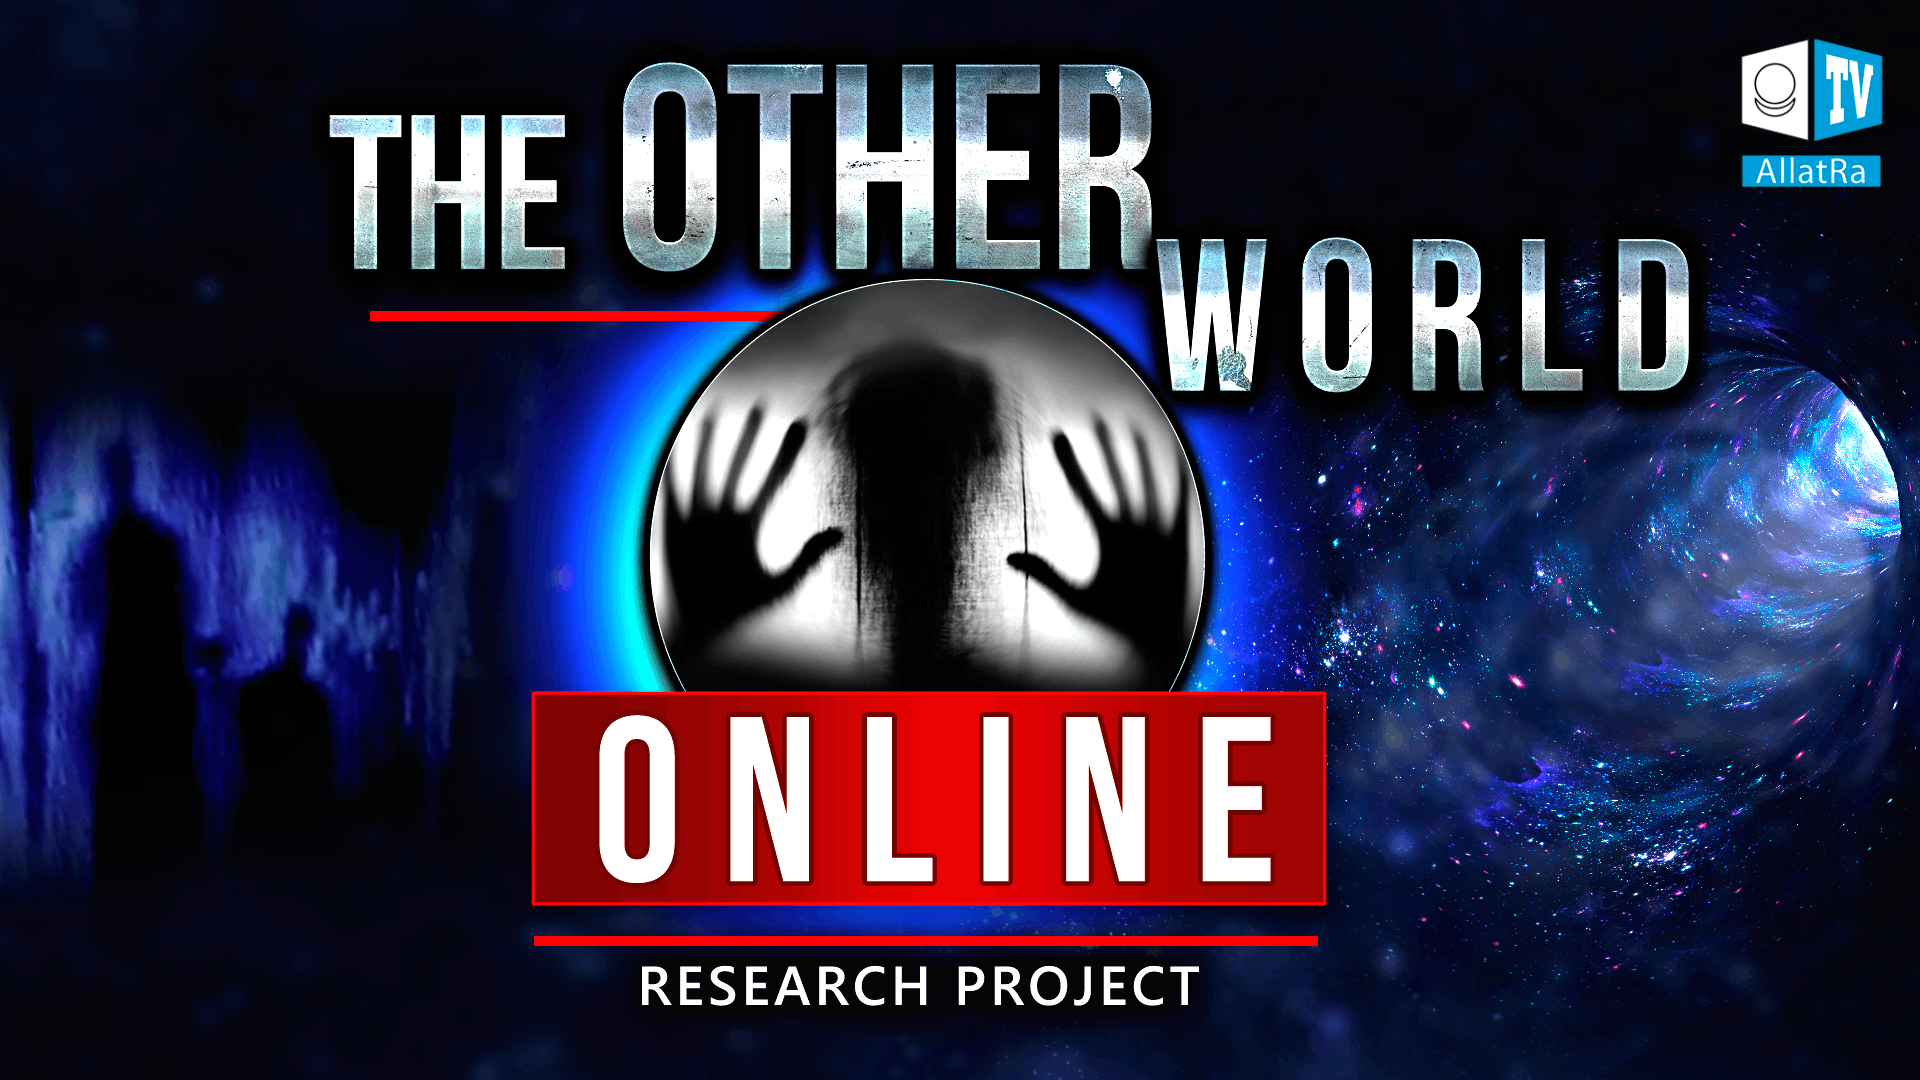 The Other World ONLINE